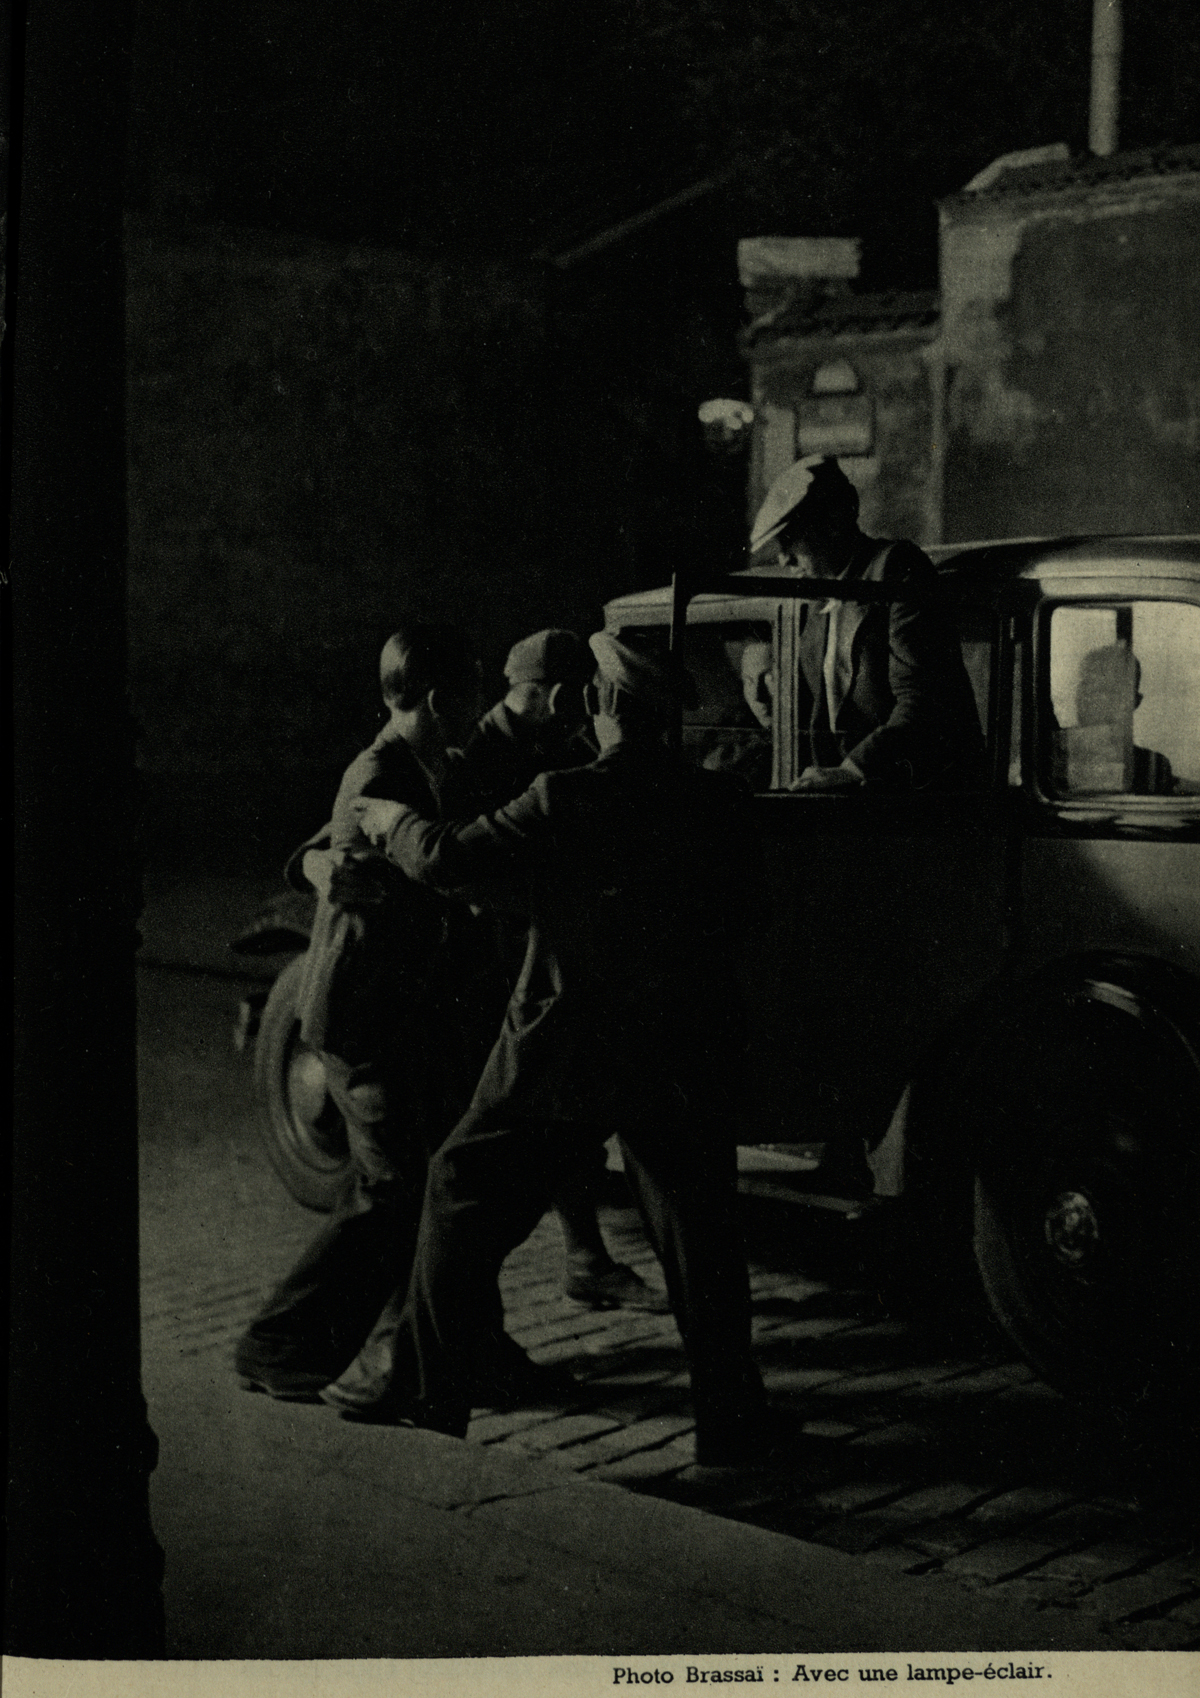 An example of Brassaï’s mastery of flash photography in the dark streets of Paris, from Éclairages artificiels (St Andrews copy Photo TR590.N38) 